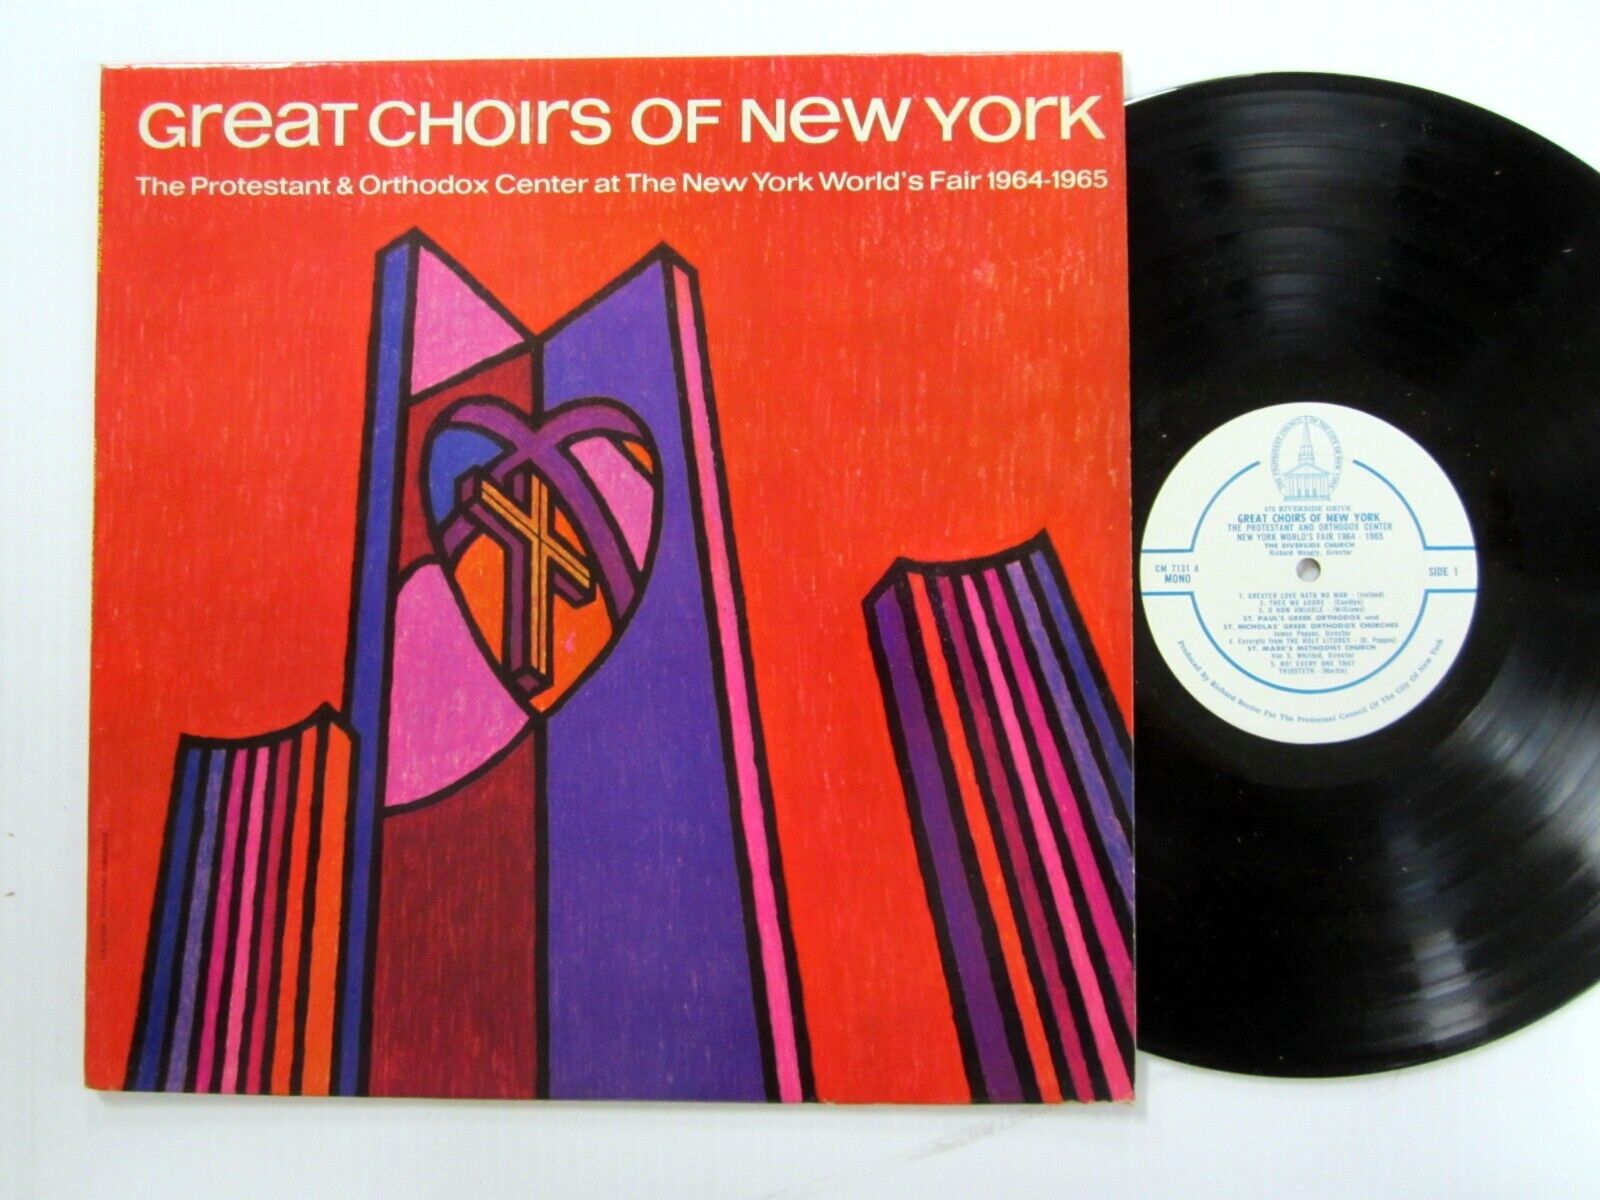 Great Choirs Of New York The Protestant & Orthodox Center 1964-1965 LP a7977